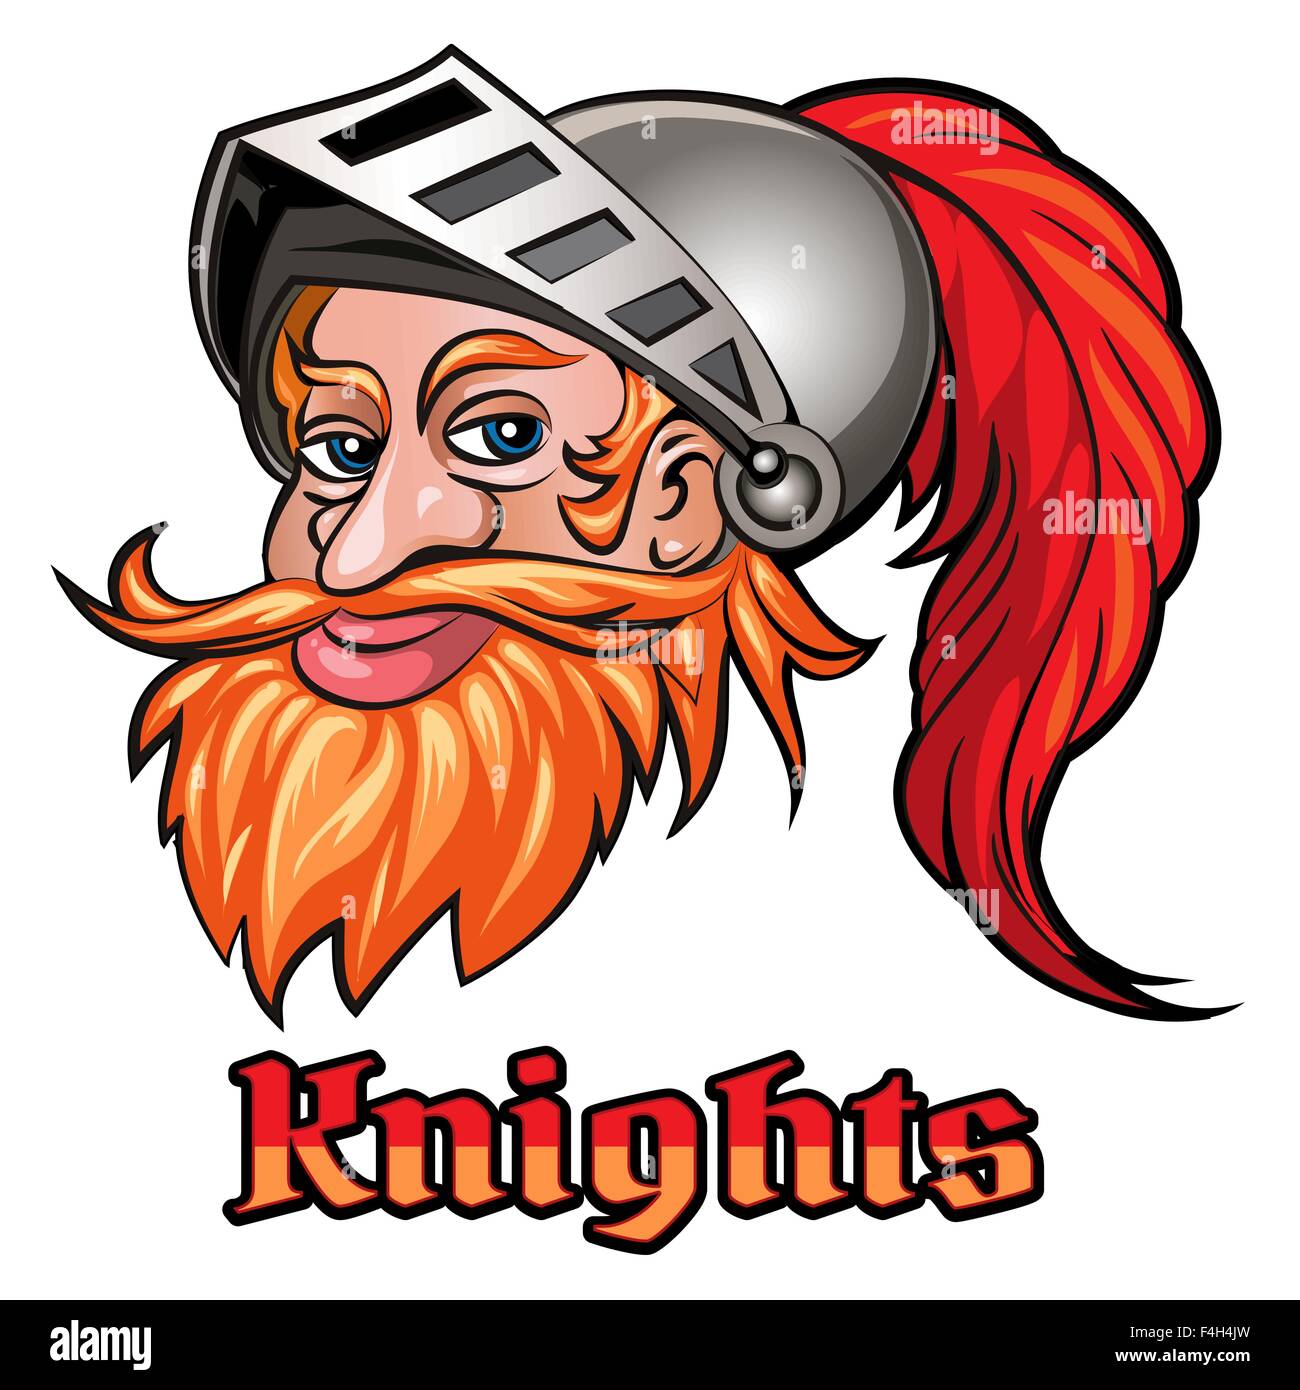 Knight head in helmet and wording Knights. Colorful illustration. Stock Vector